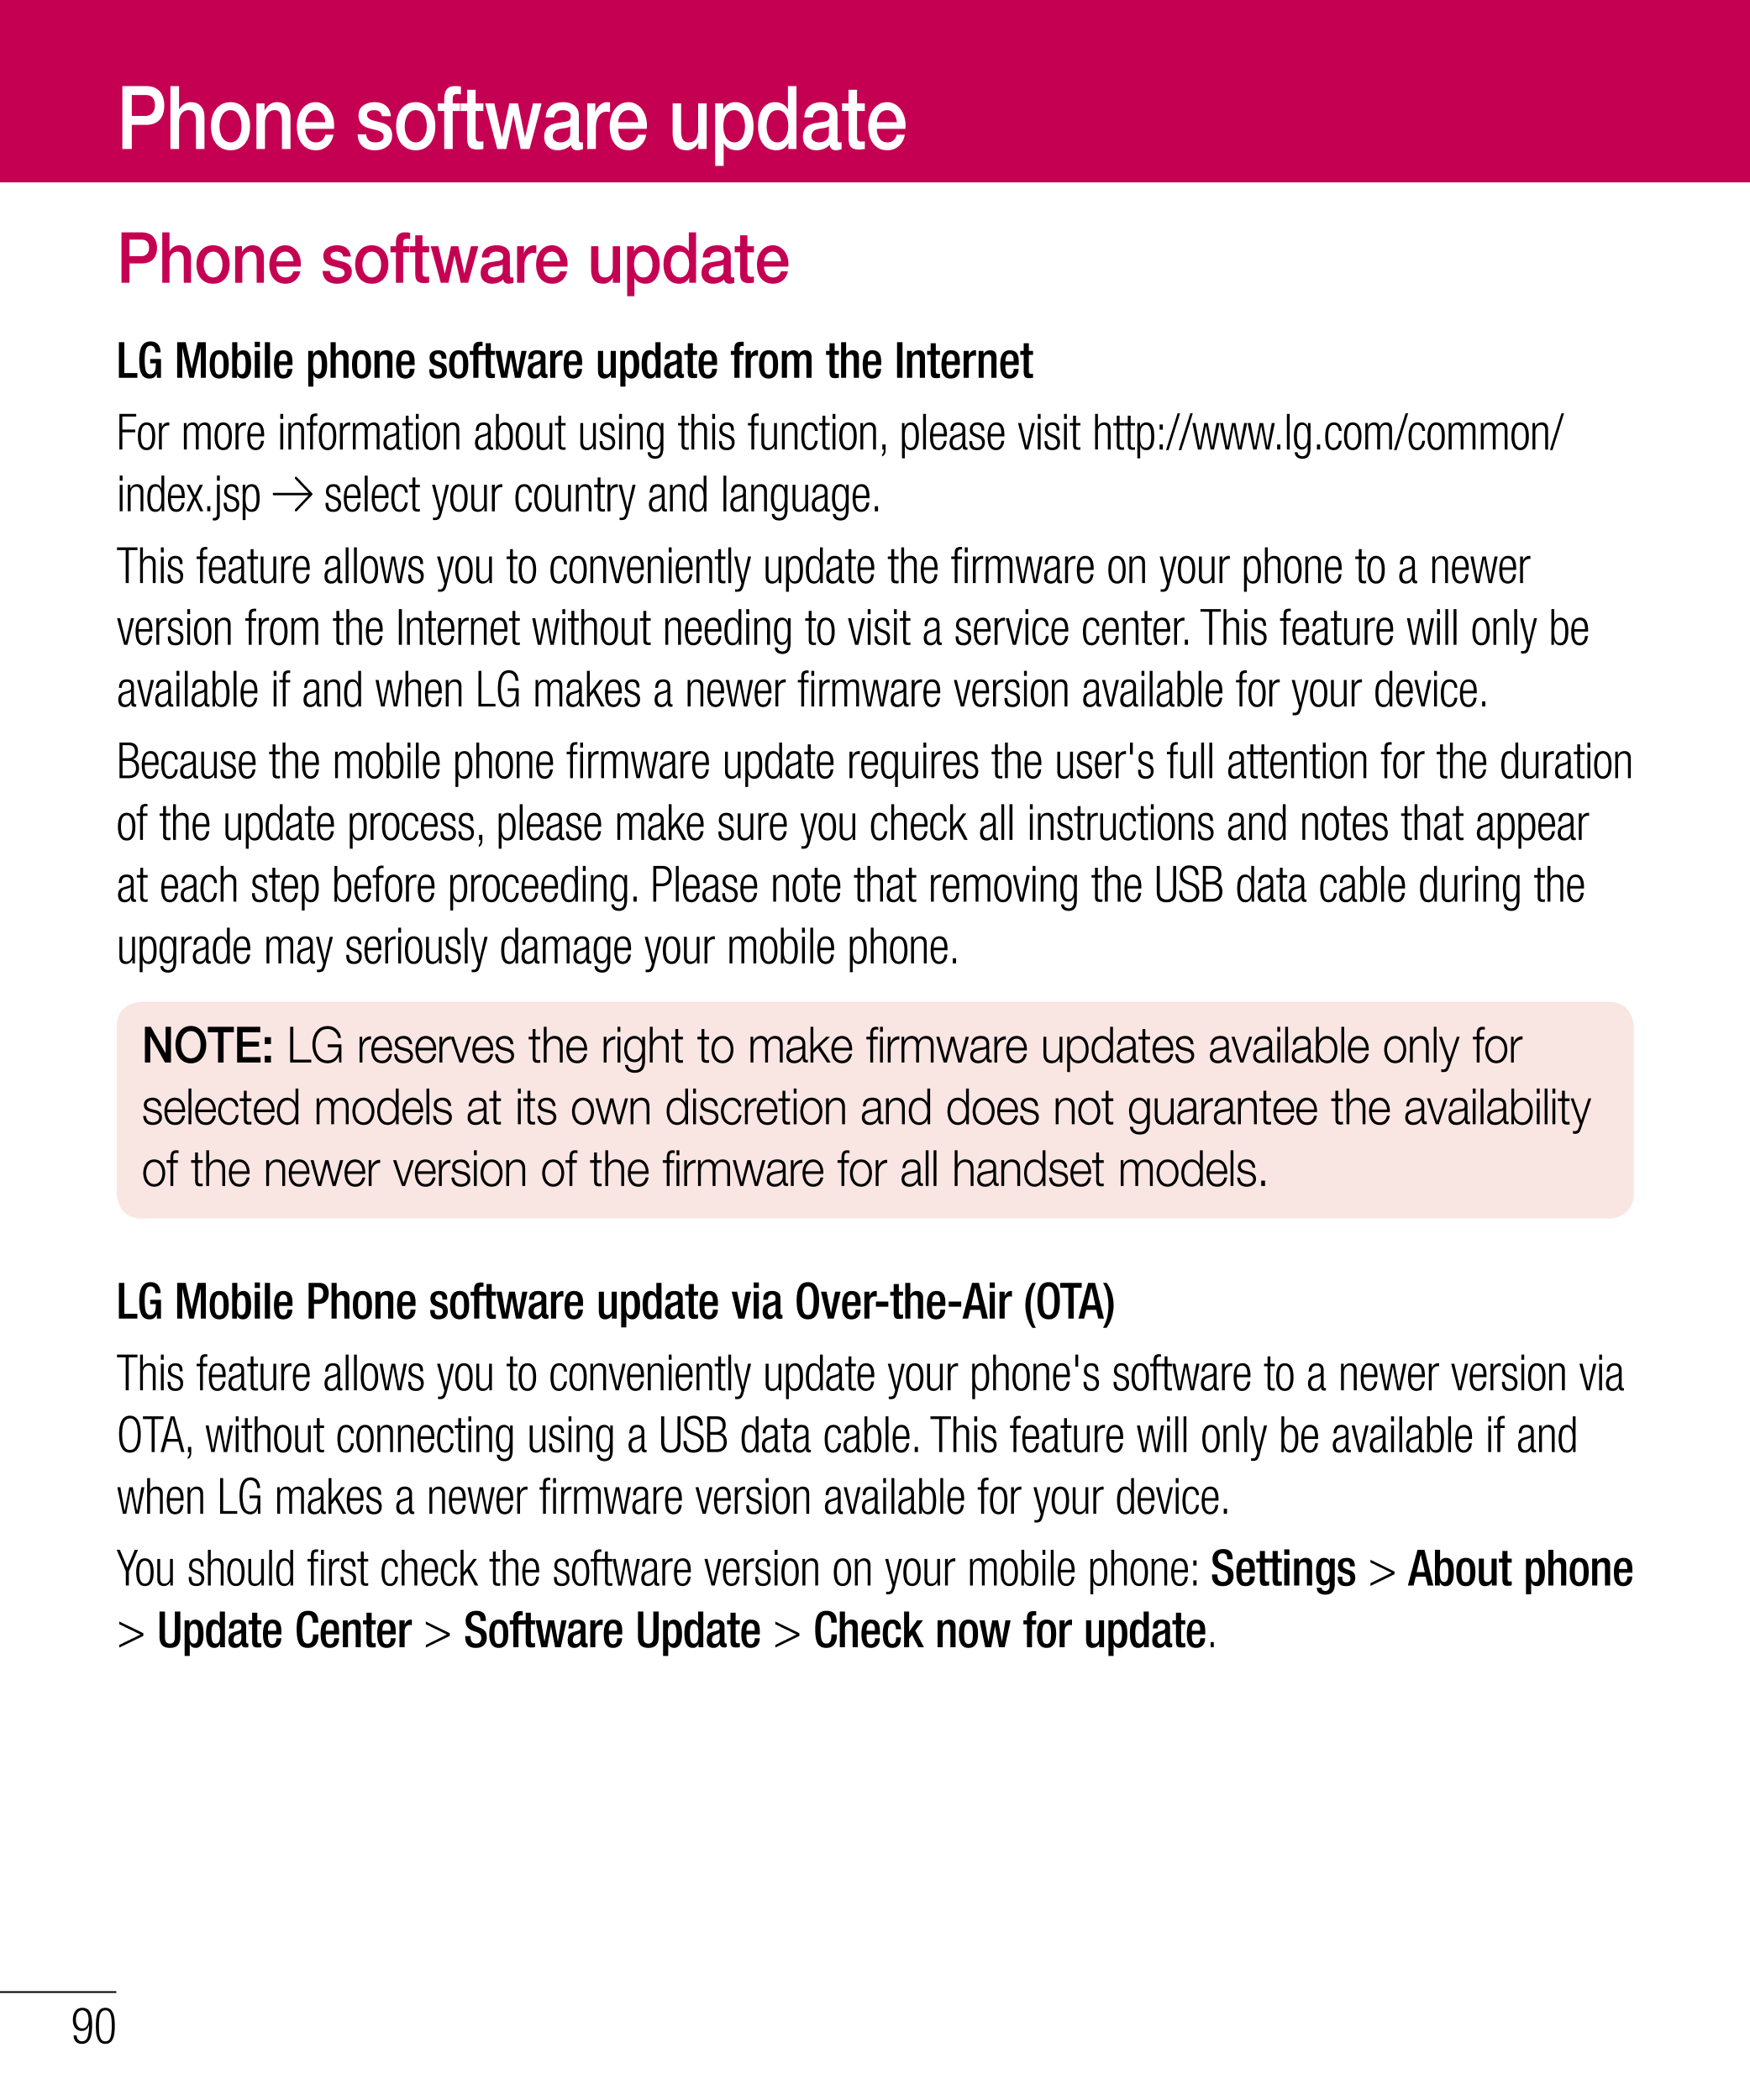 Phone software update
Phone software update
LG Mobile phone software update from the Internet
For more information about using t